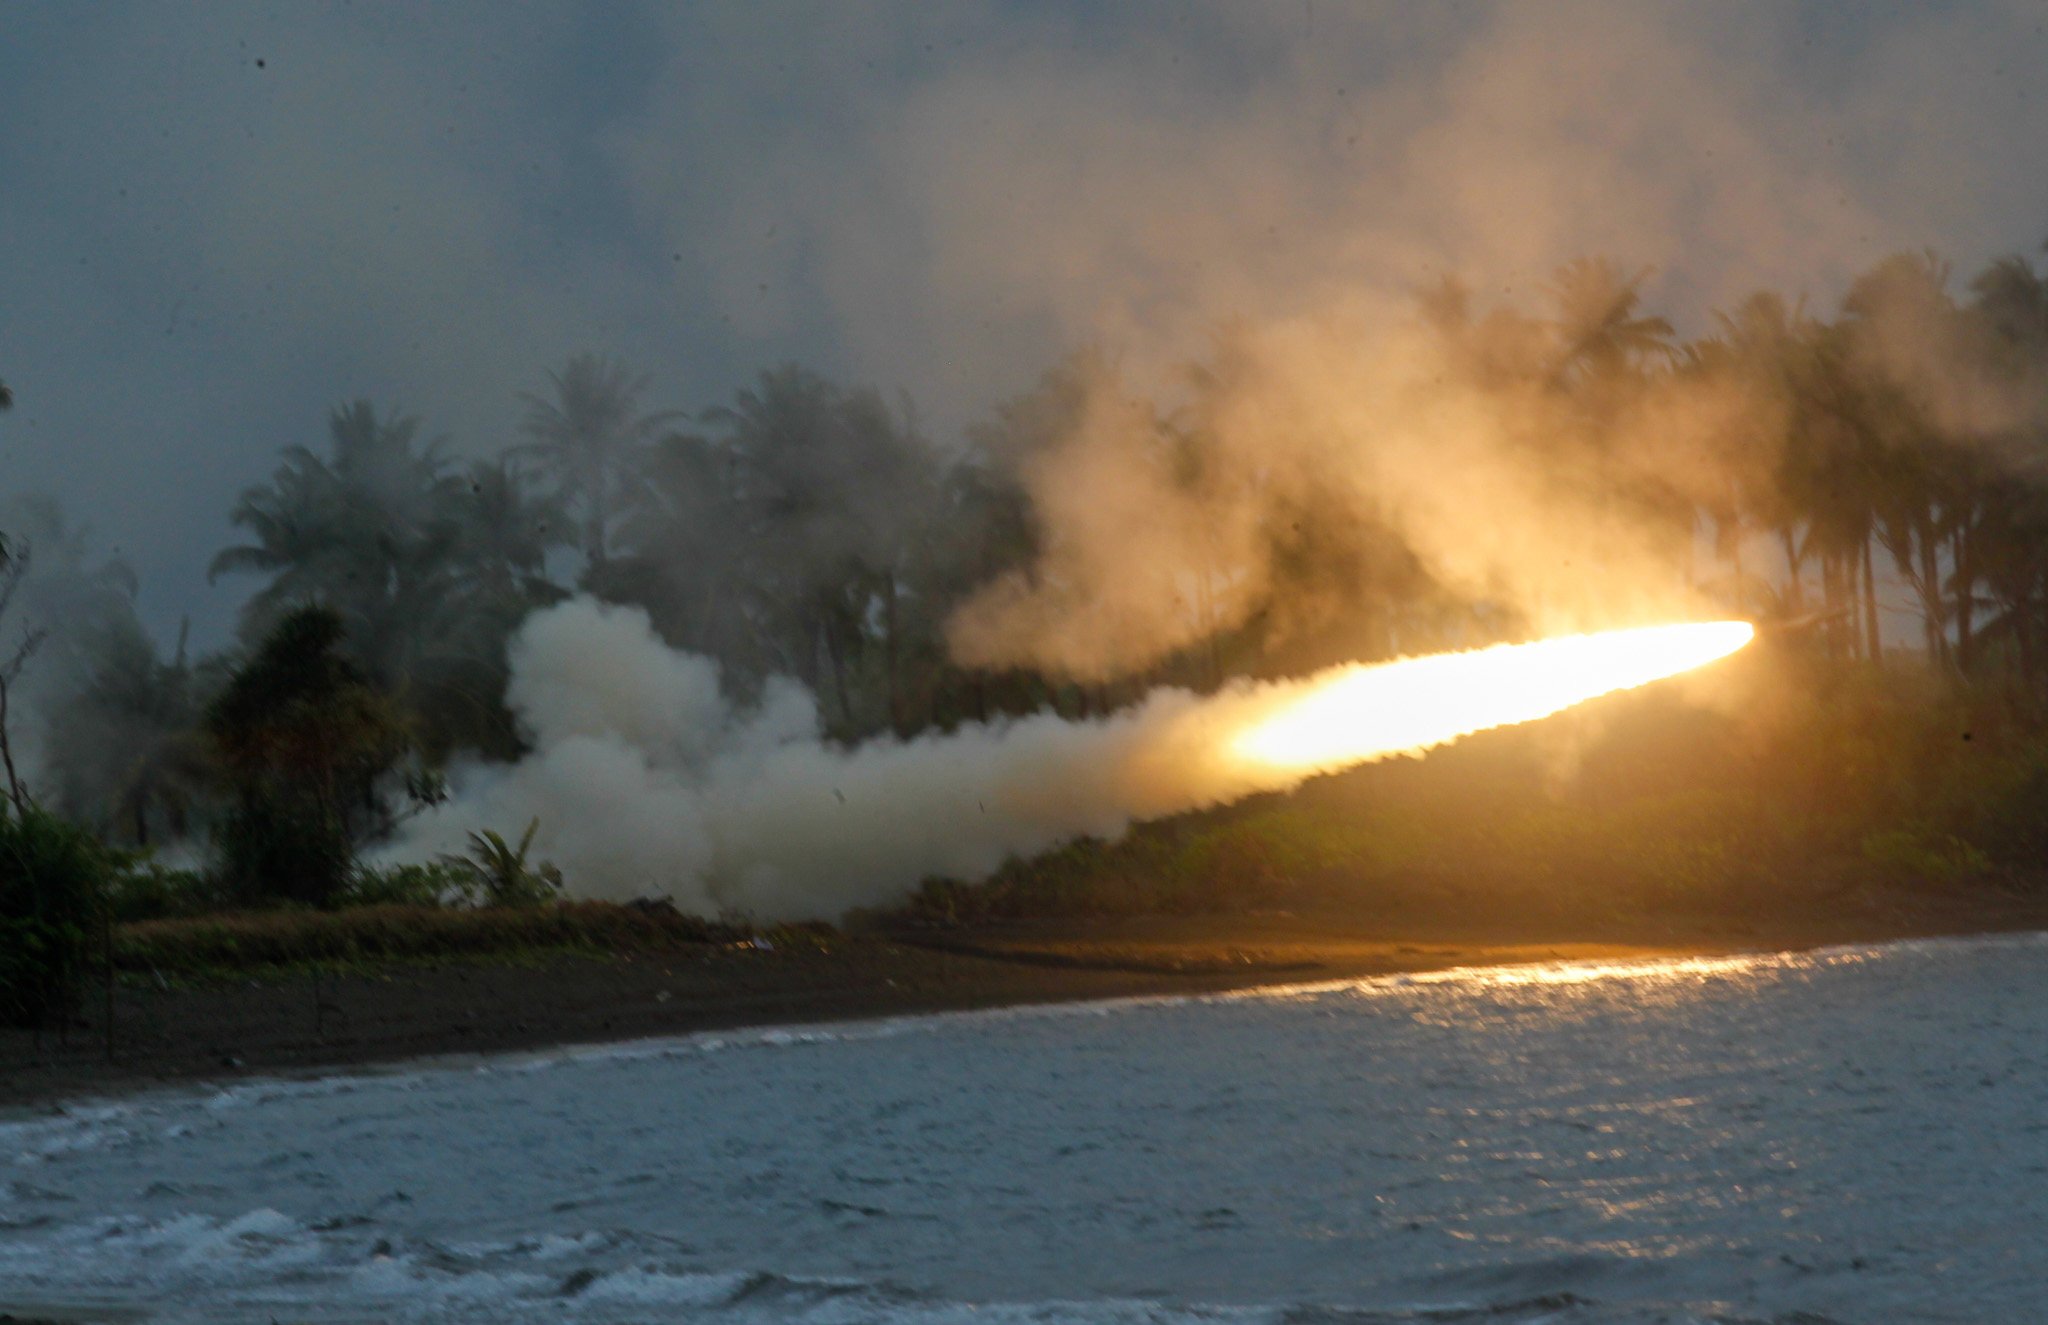 A rocket launched using a M142 High Mobility Artillery Rocket System (HIMARS) from the coastal village of Campong Ulay in Palawan, an island facing the South China Sea, on Thursday as part of this year’s annual Balikatan joint military exercises. Photo: Jeoffrey Maitem